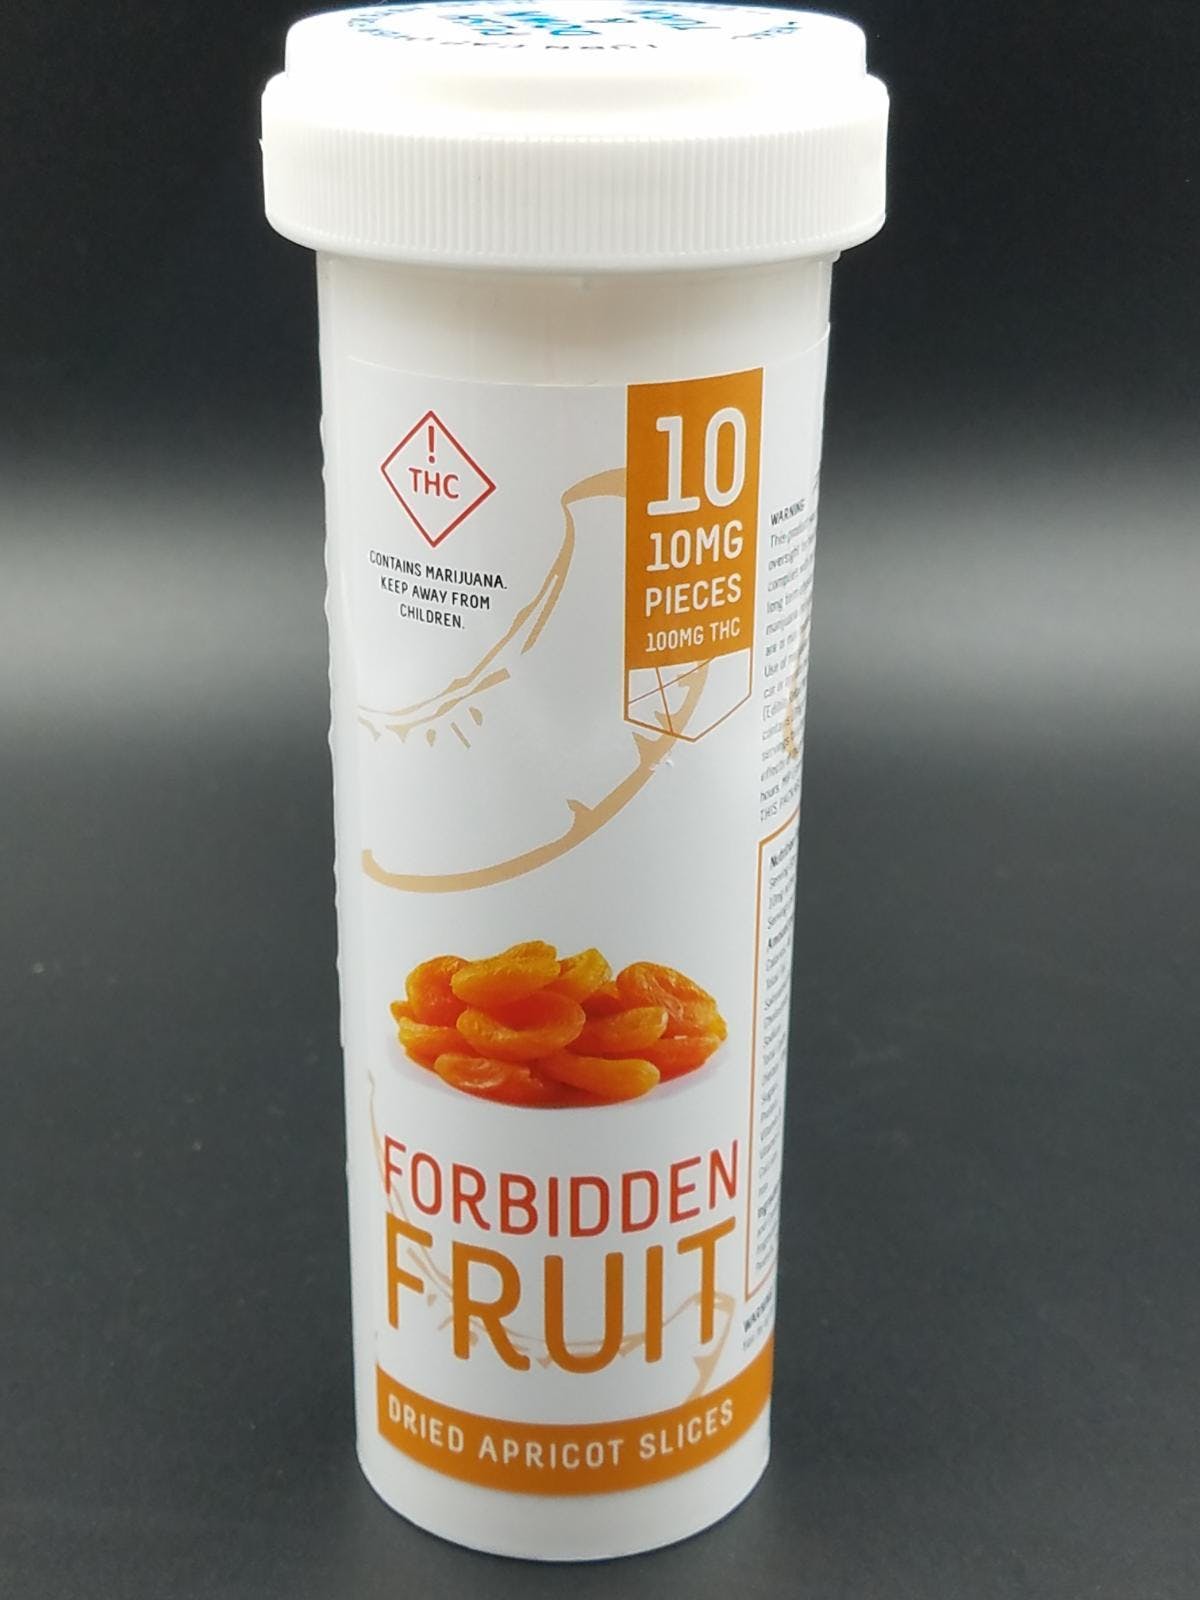 edible-forbidden-fruit-dehydrated-apricot-slices-100mg